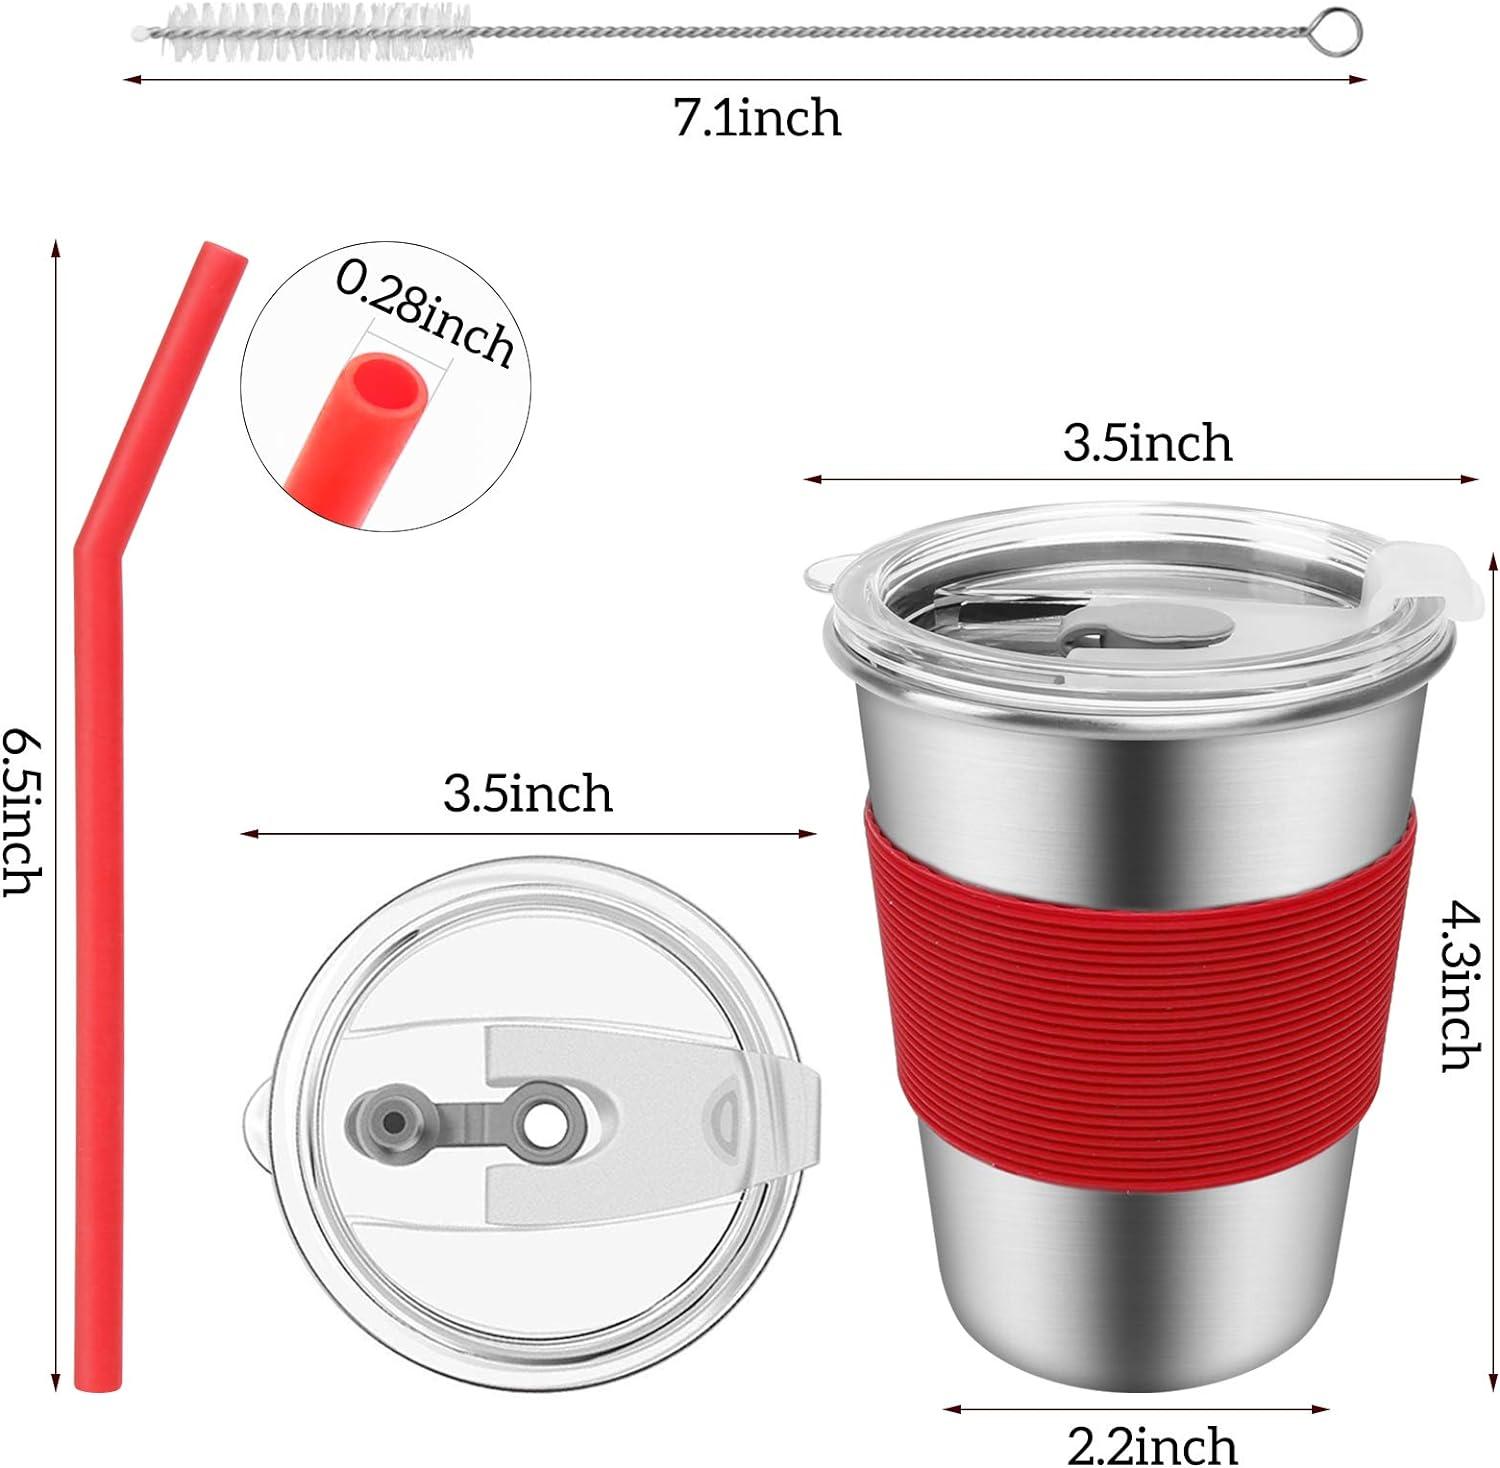 Kids Tumblers with Lids and Straws 6 Pack 12oz Spill Proof Cups for Kids  Stainless Steel Toddler Cups Unbreakable Water Drinking Glasses BPA-Free  Reusable Metal Sippy Mug for Children Adult Outdoor